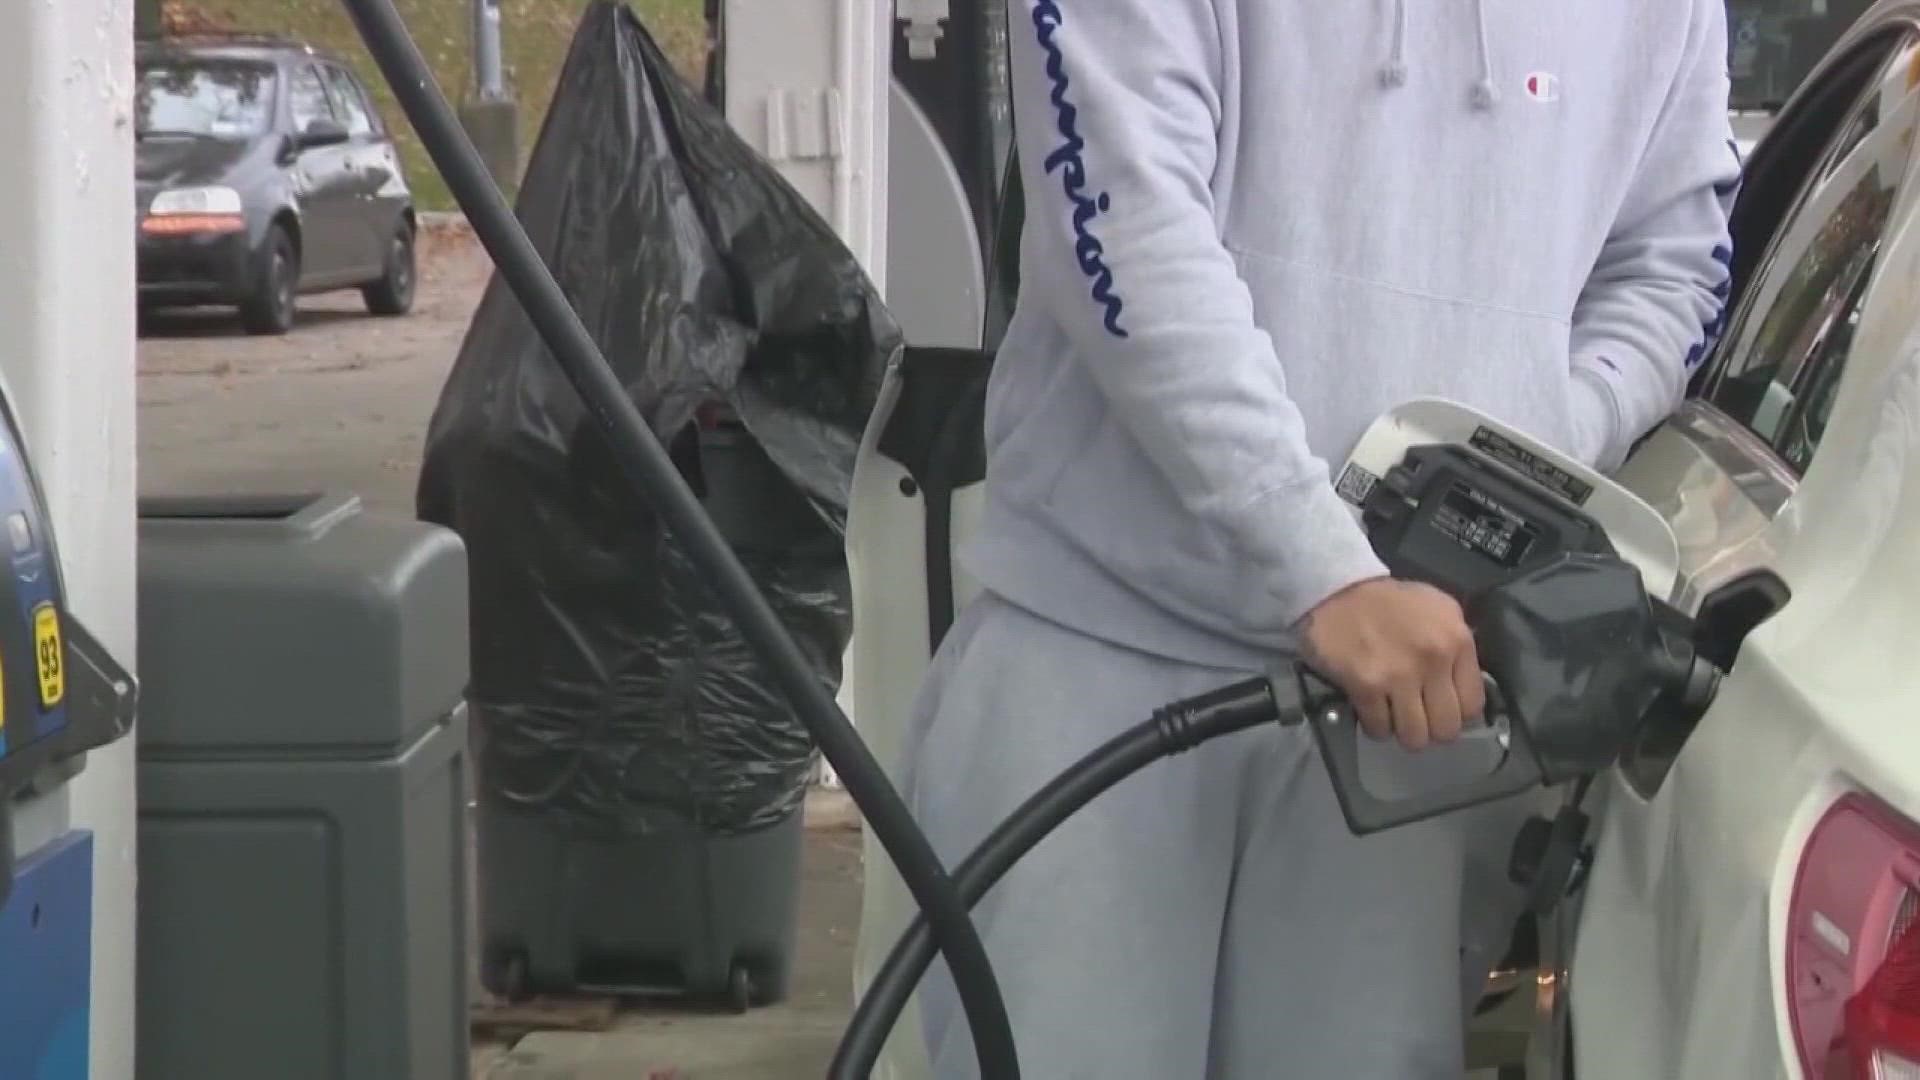 The average cost of a gallon of gas in Tennessee was around $4.34 on Friday, according to AAA.